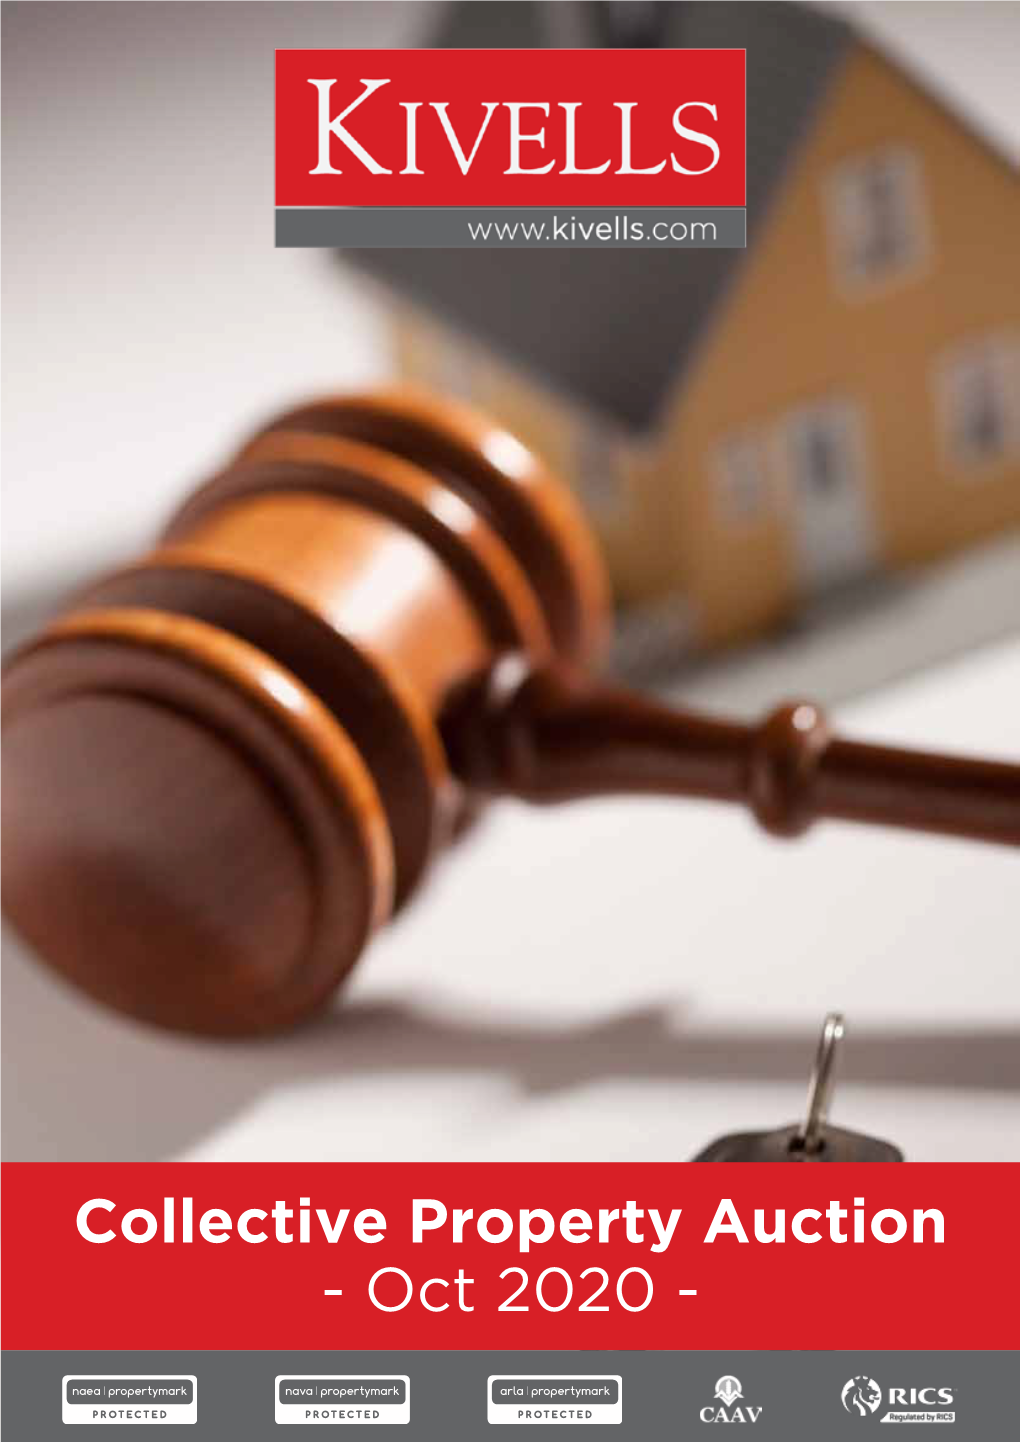 Collective Property Auction - Oct 2020 - Why Choose Kivells?